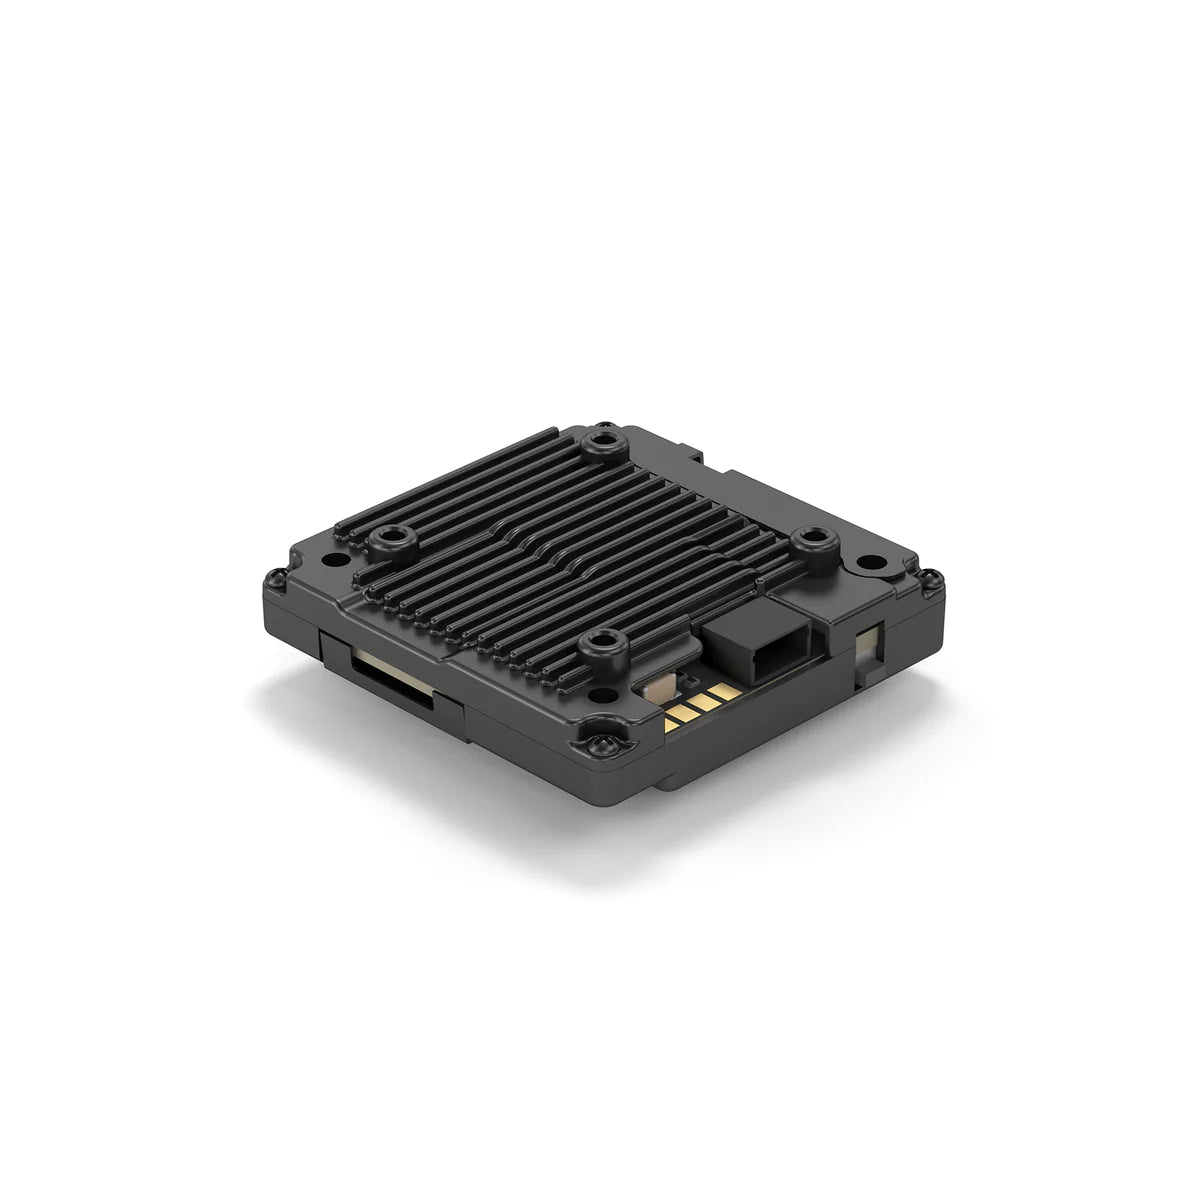 Walksnail Avatar HD VTX V2 Module - With 8G/32G Built-in Storage 1080P/720P Recording for FPV Drone